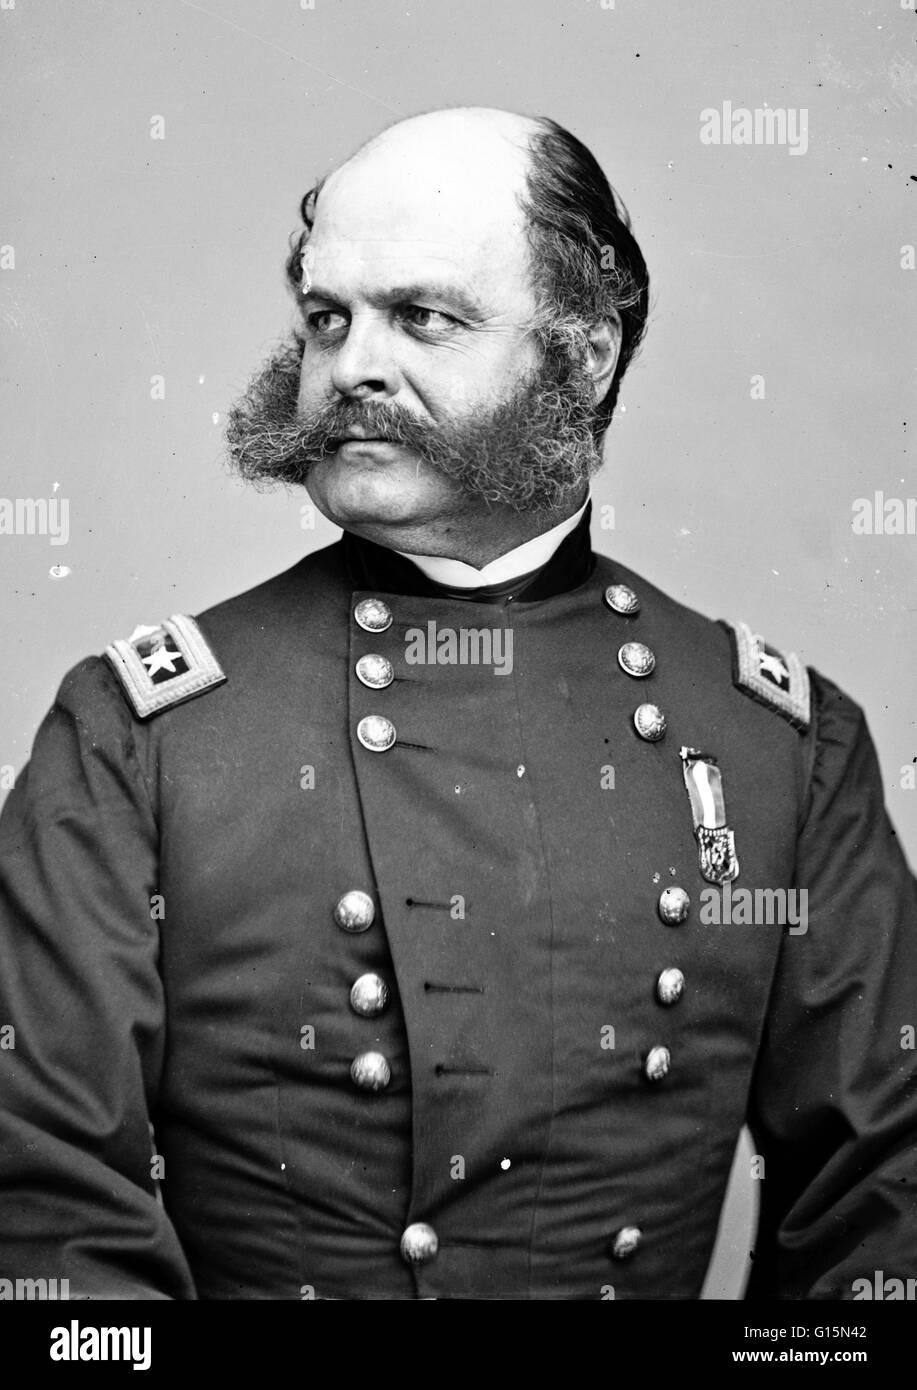 Ambrose Everett Burnside (May 23, 1824 - September 13, 1881) was an American soldier, railroad executive, inventor, industrialist, and politician from Rhode Island, serving as governor and a US Senator. As a Union Army general in the American Civil War, h Stock Photo